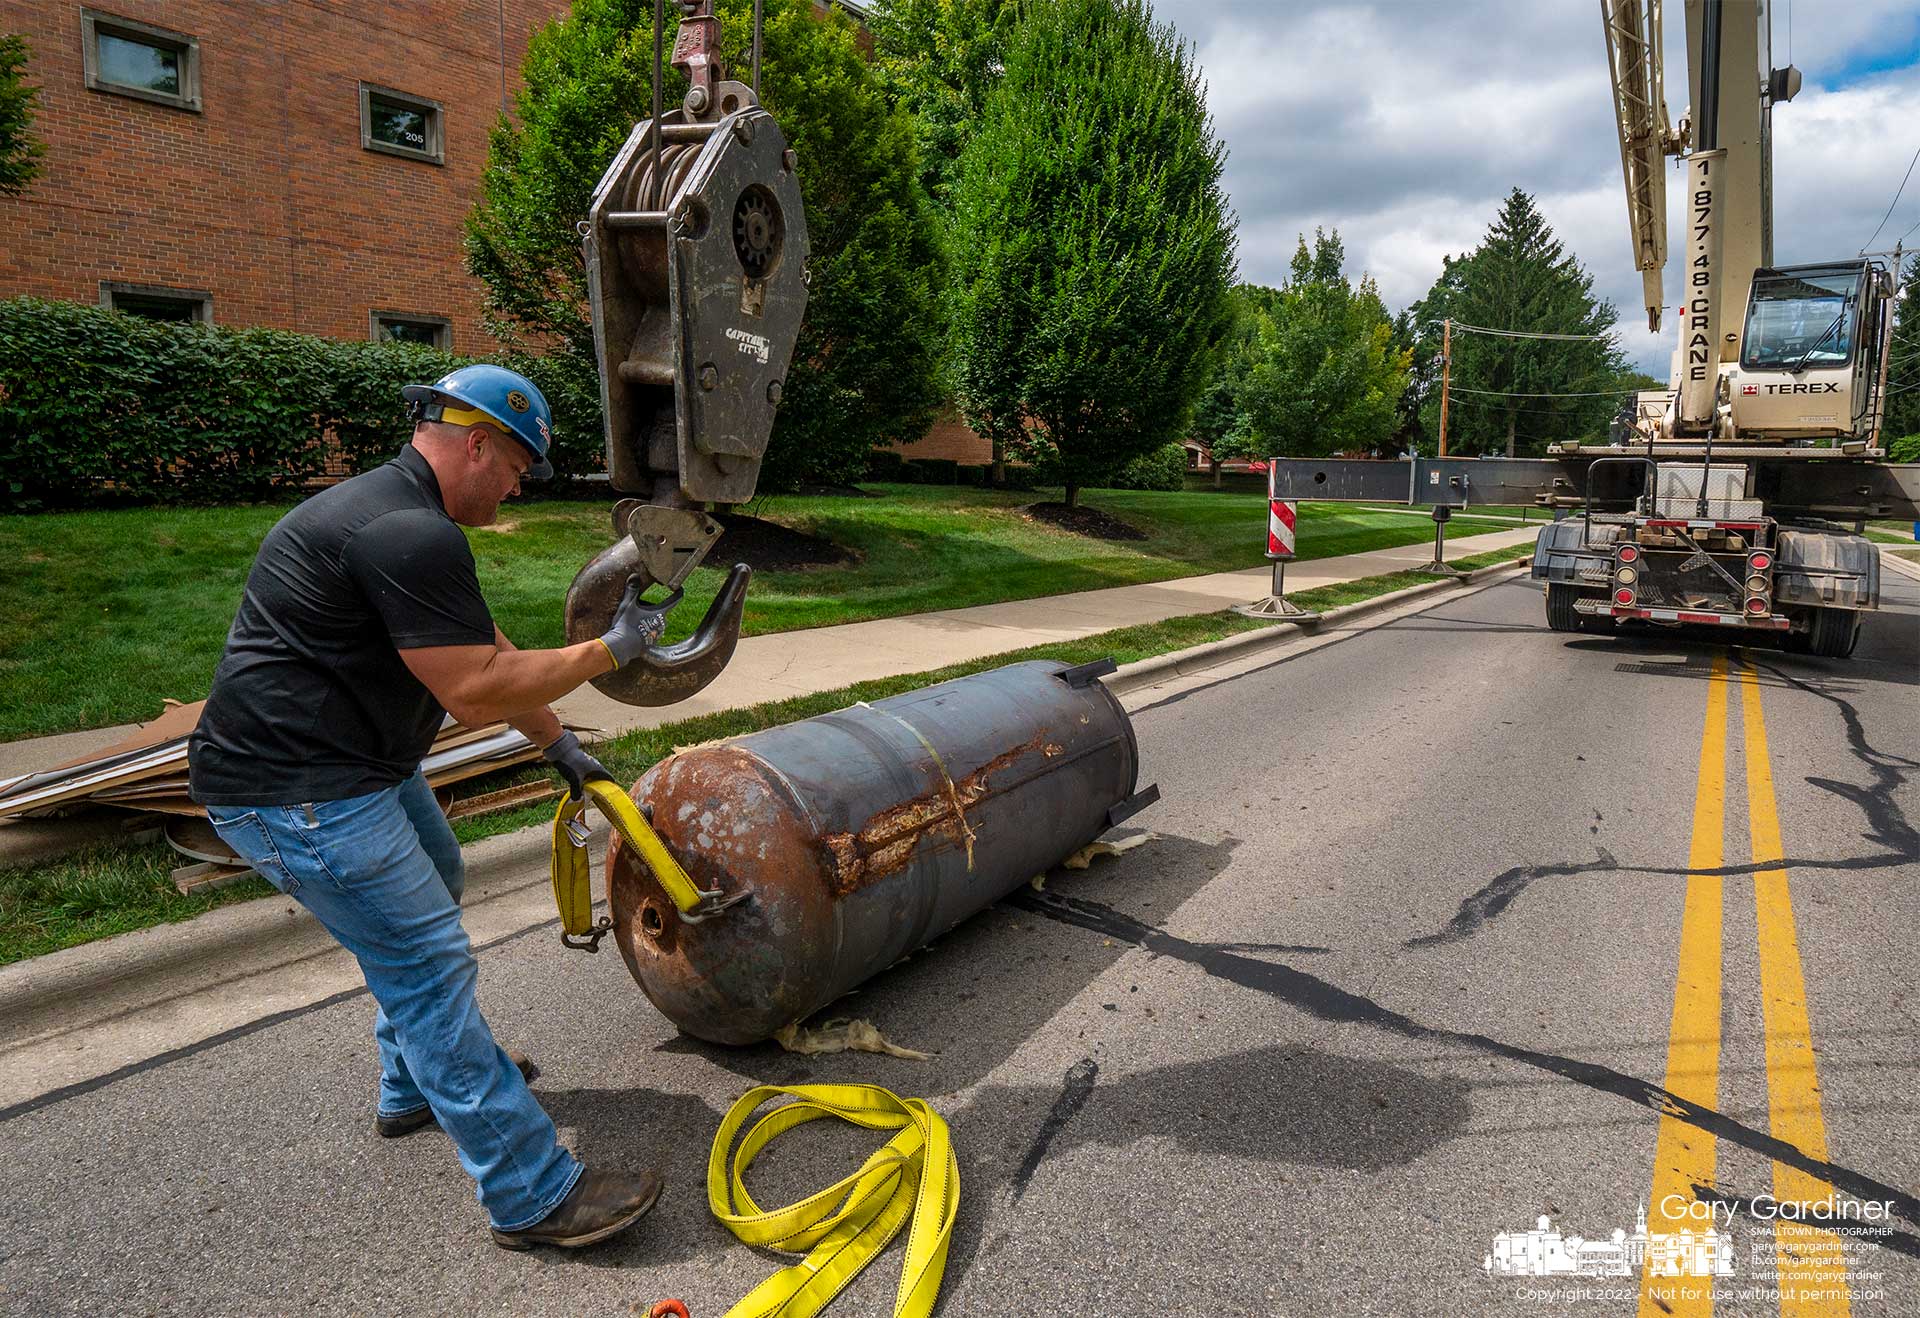 The replaced steel hot water tank from the science building at Otterbein University is moved onto West Main Street for disposal as the building gets a few upgrades before classes start next week. My Final Photo for August 16, 2022.